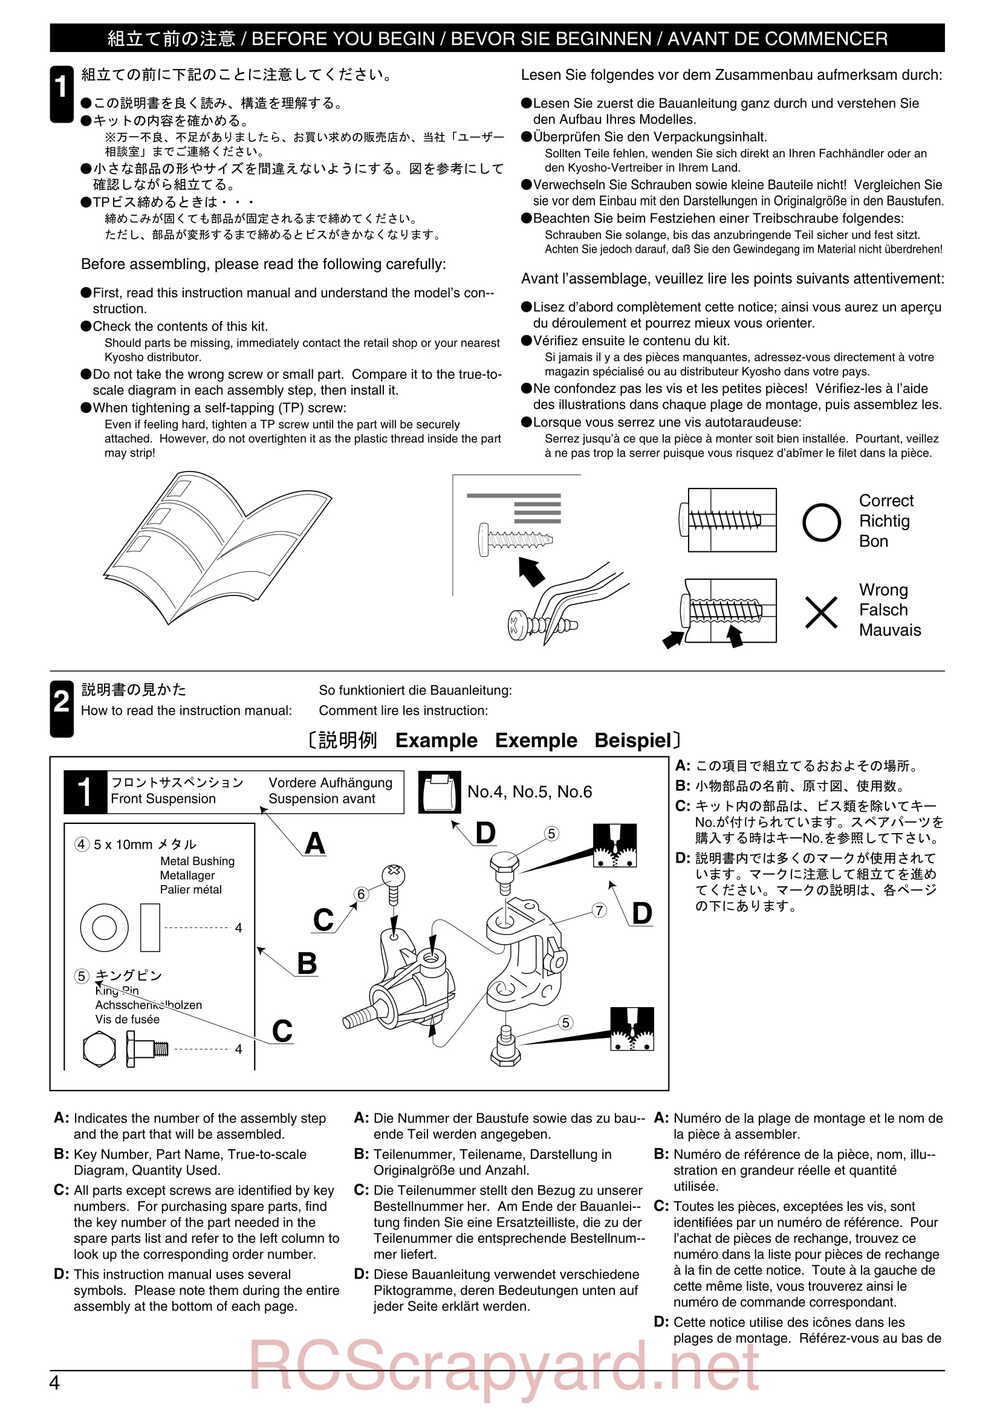 Kyosho - 31122 - V-One S2 - Manual - Page 04